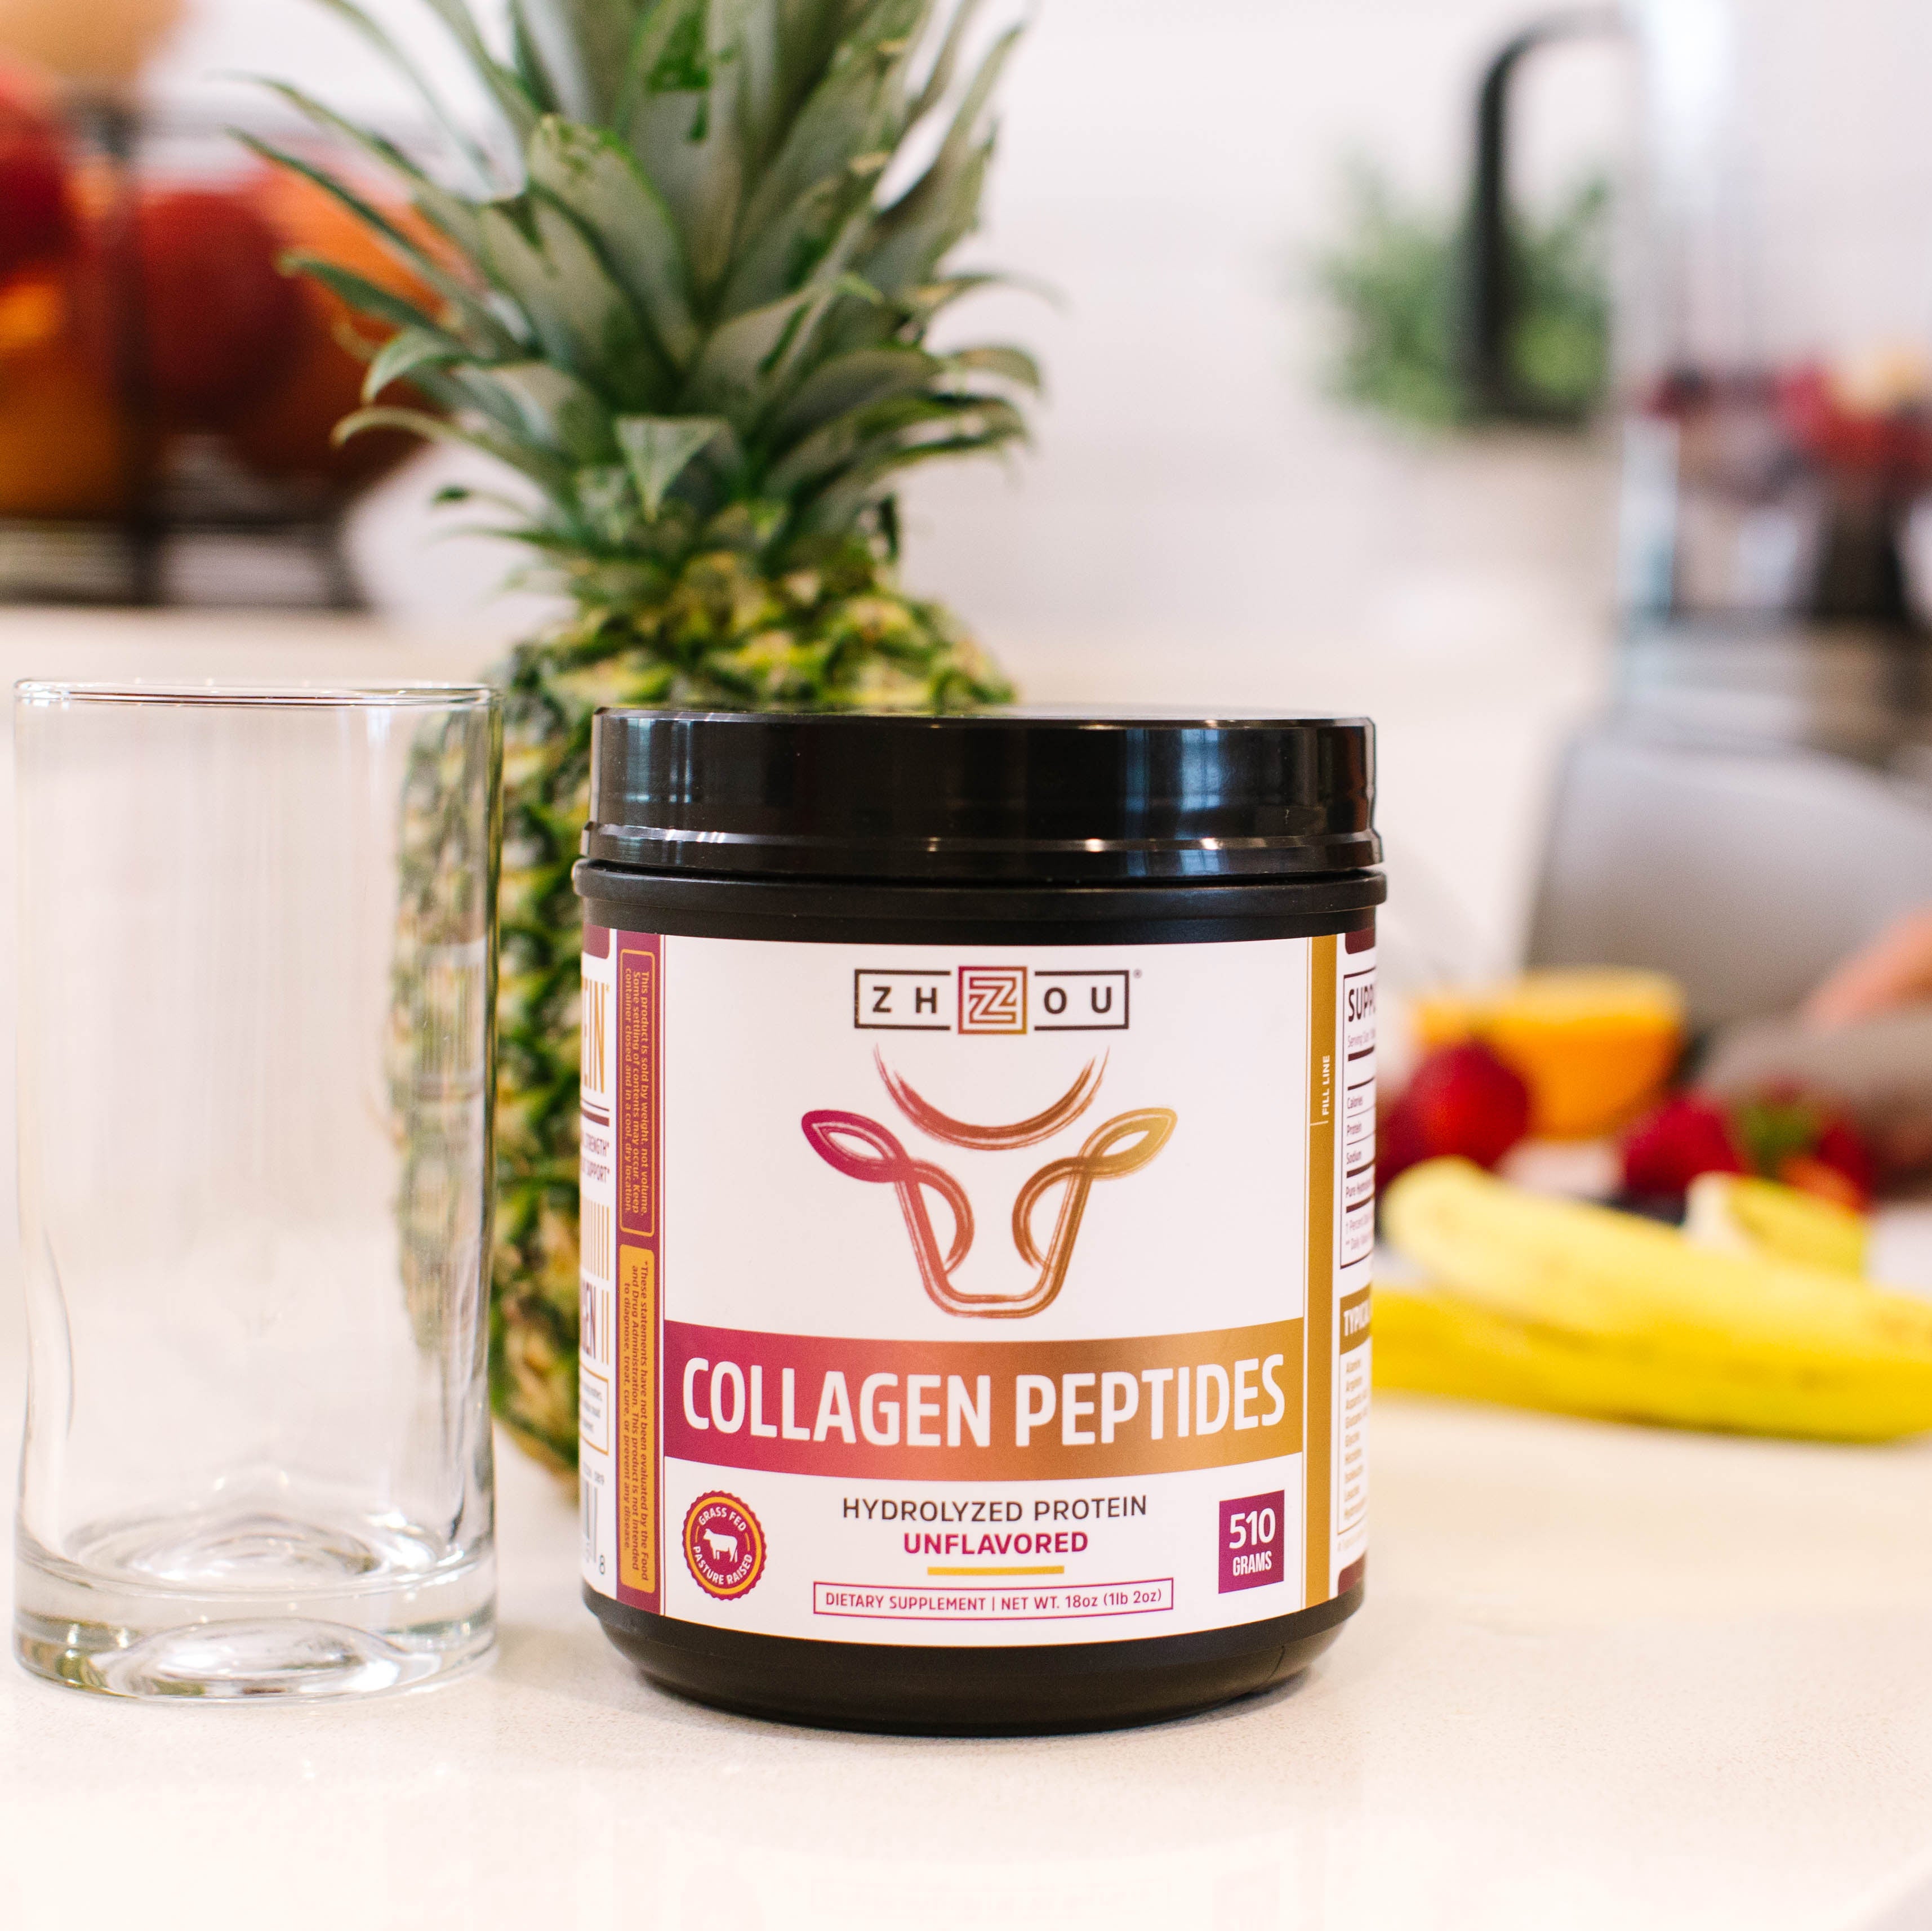 A tub of Zhou’s Collagen Peptides on a kitchen counter with pineapple and someone cooking in the background. 